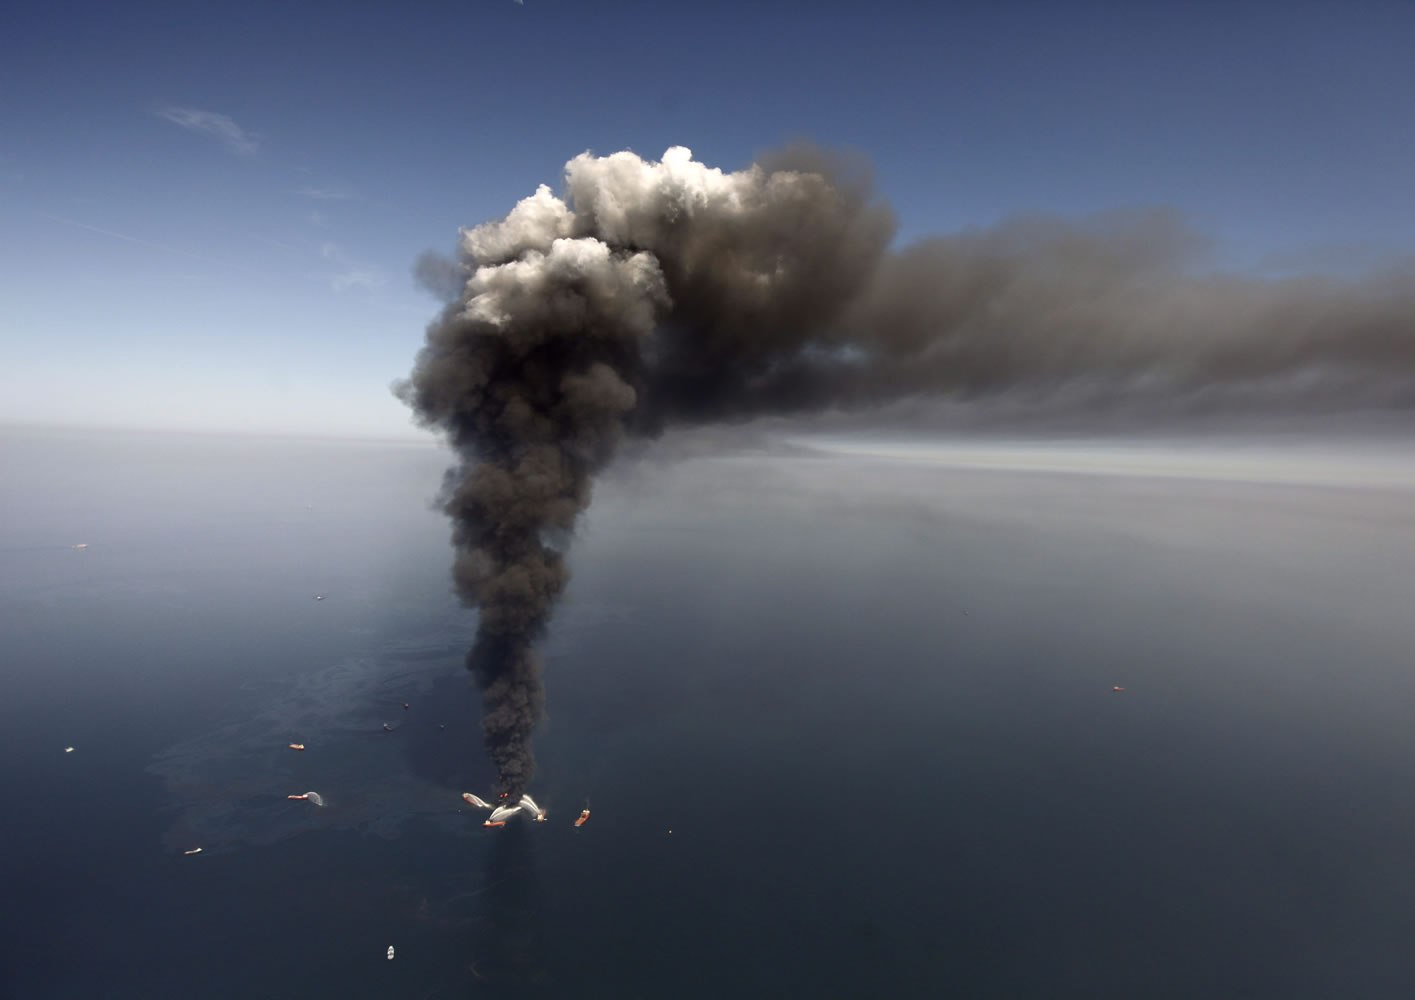 FILE -  In this Wednesday, April 21, 2010 file photo, oil can be seen in the Gulf of Mexico, more than 50 miles southeast of Venice on Louisiana's tip, as a large plume of smoke rises from fires on BP's Deepwater Horizon offshore oil rig. An April 20, 2010 explosion at the offshore platform killed 11 men, and the subsequent leak released an estimated 172 million gallons of petroleum into the gulf. U.S. District Judge Carl Barbier ruled Thursday, Sept. 4, 2014, in New Orleans, La., that BP acted recklessly and bears most of the responsibility for the oil spill. The ruling exposes BP to about $18 million in civil fines under the Clean Water Act.